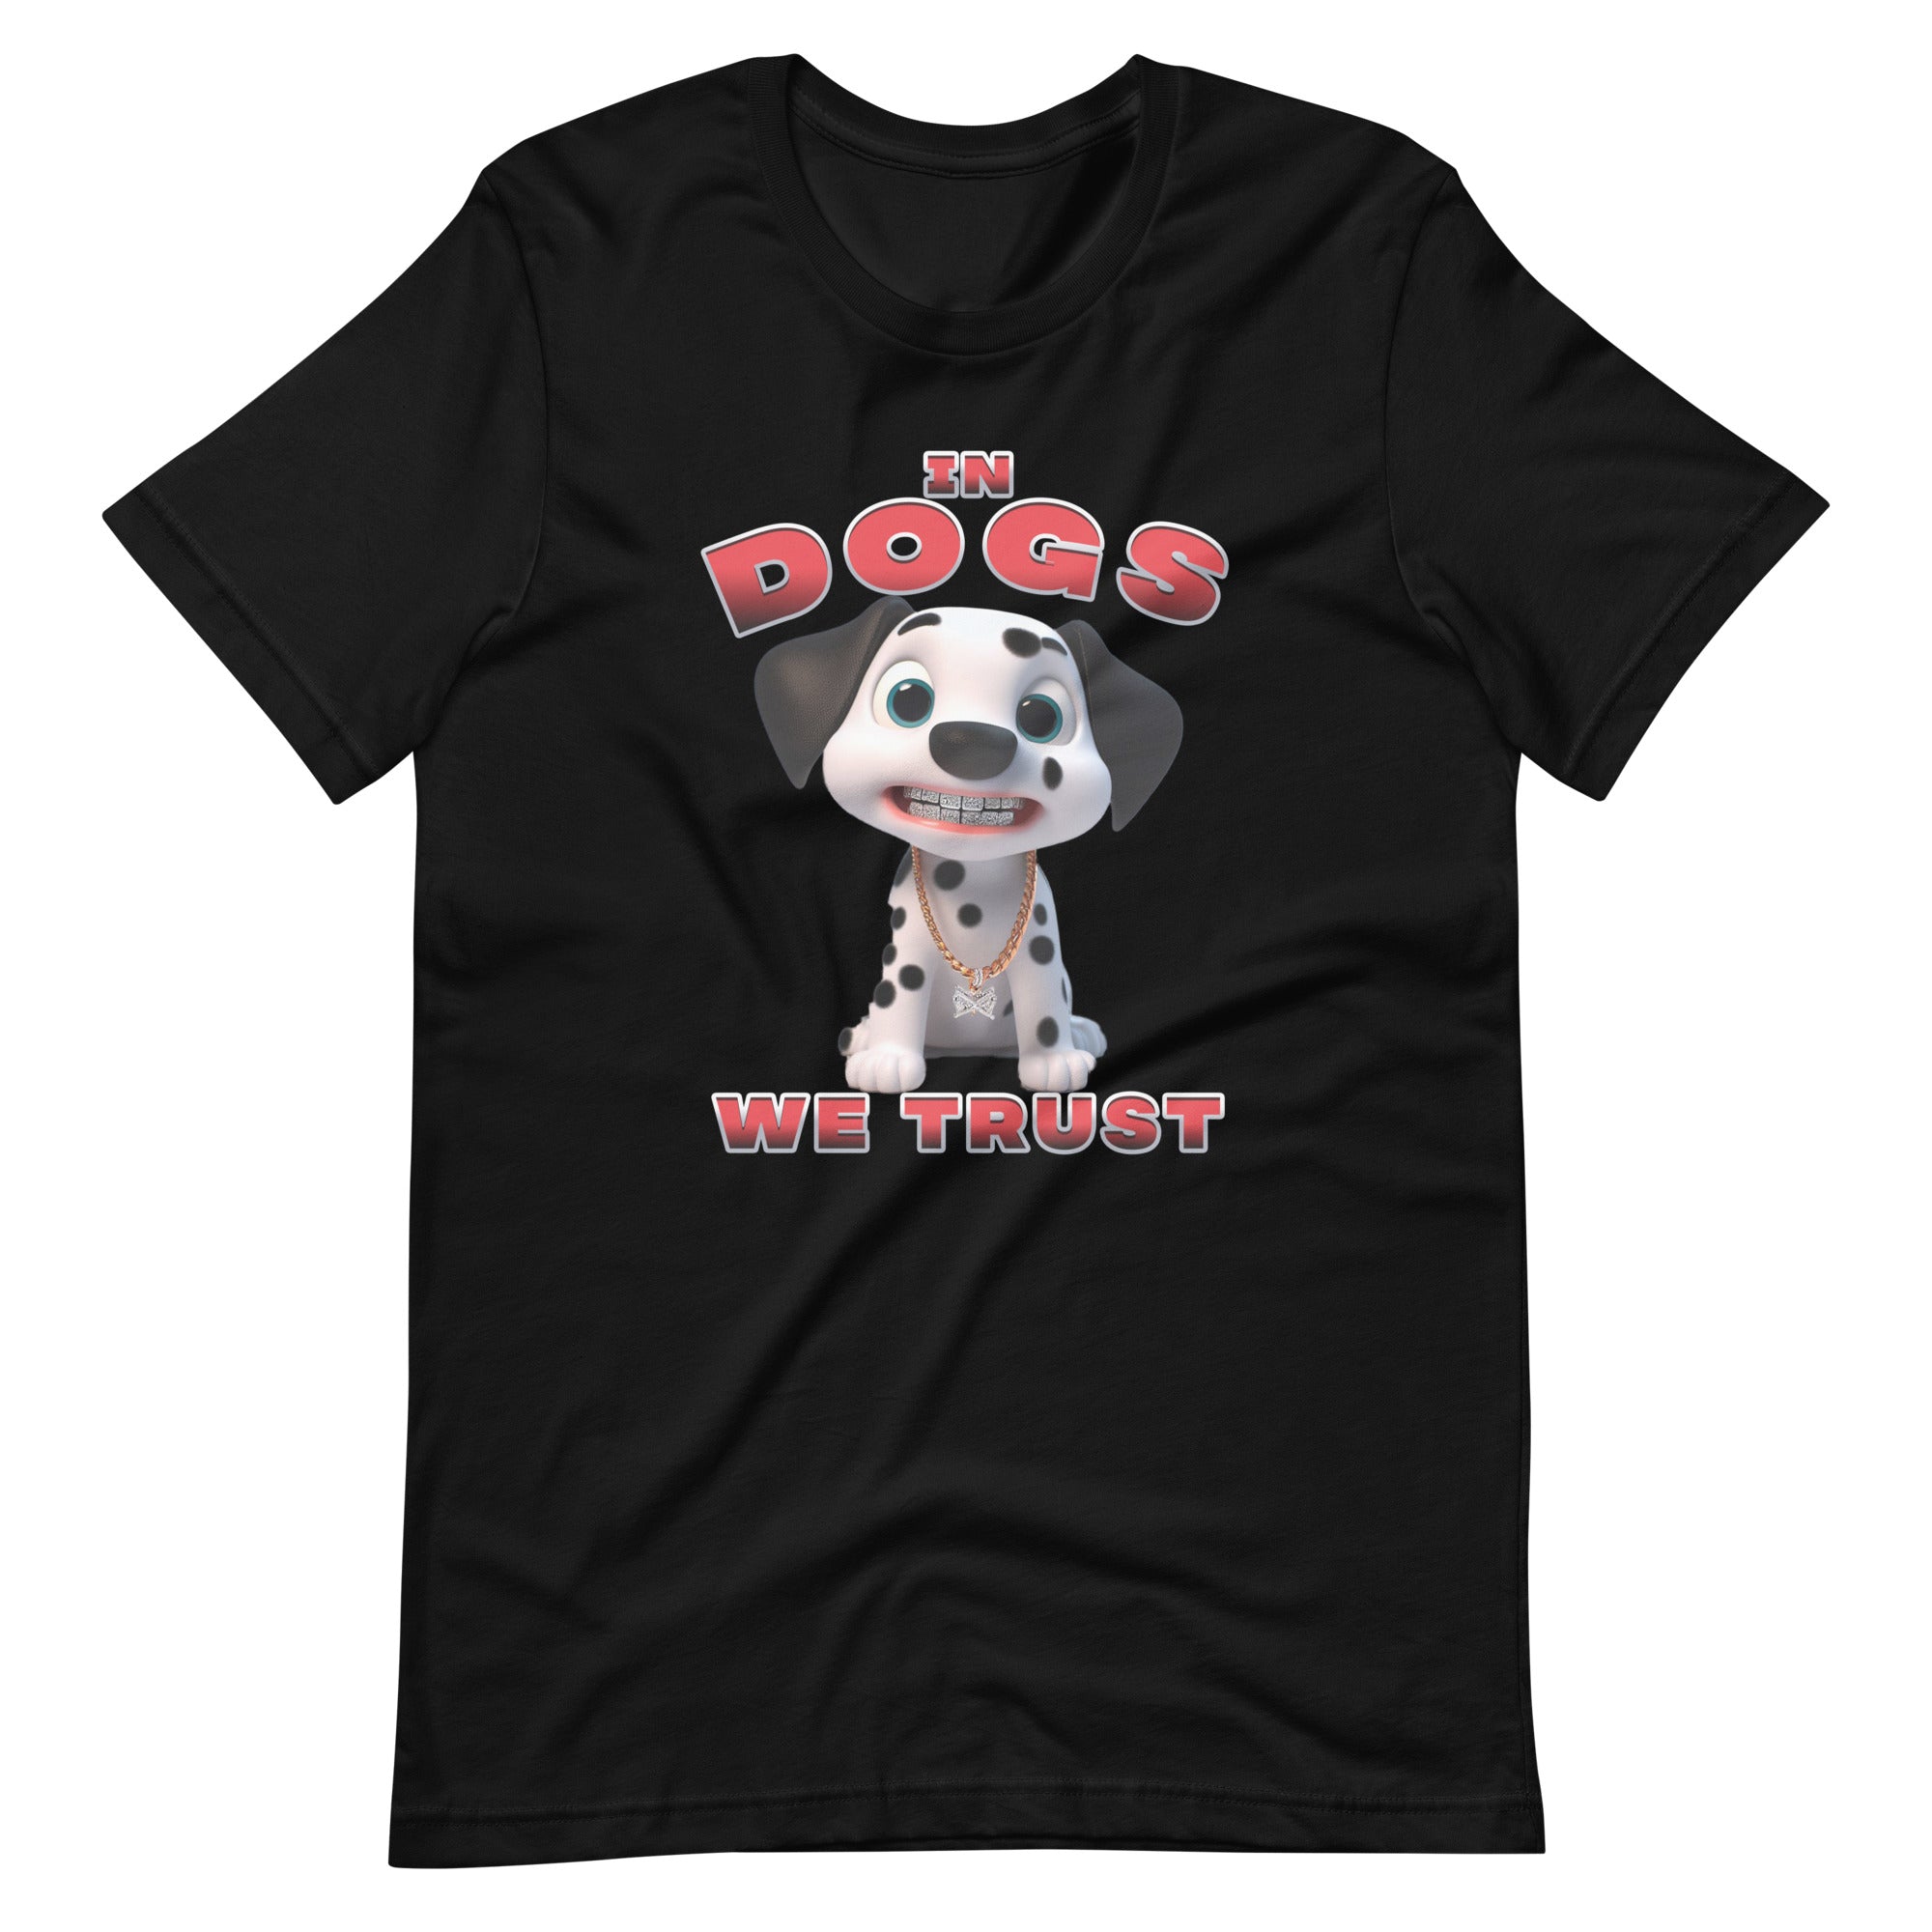 "In Dogs We Trust" T-shirt - Dalmation